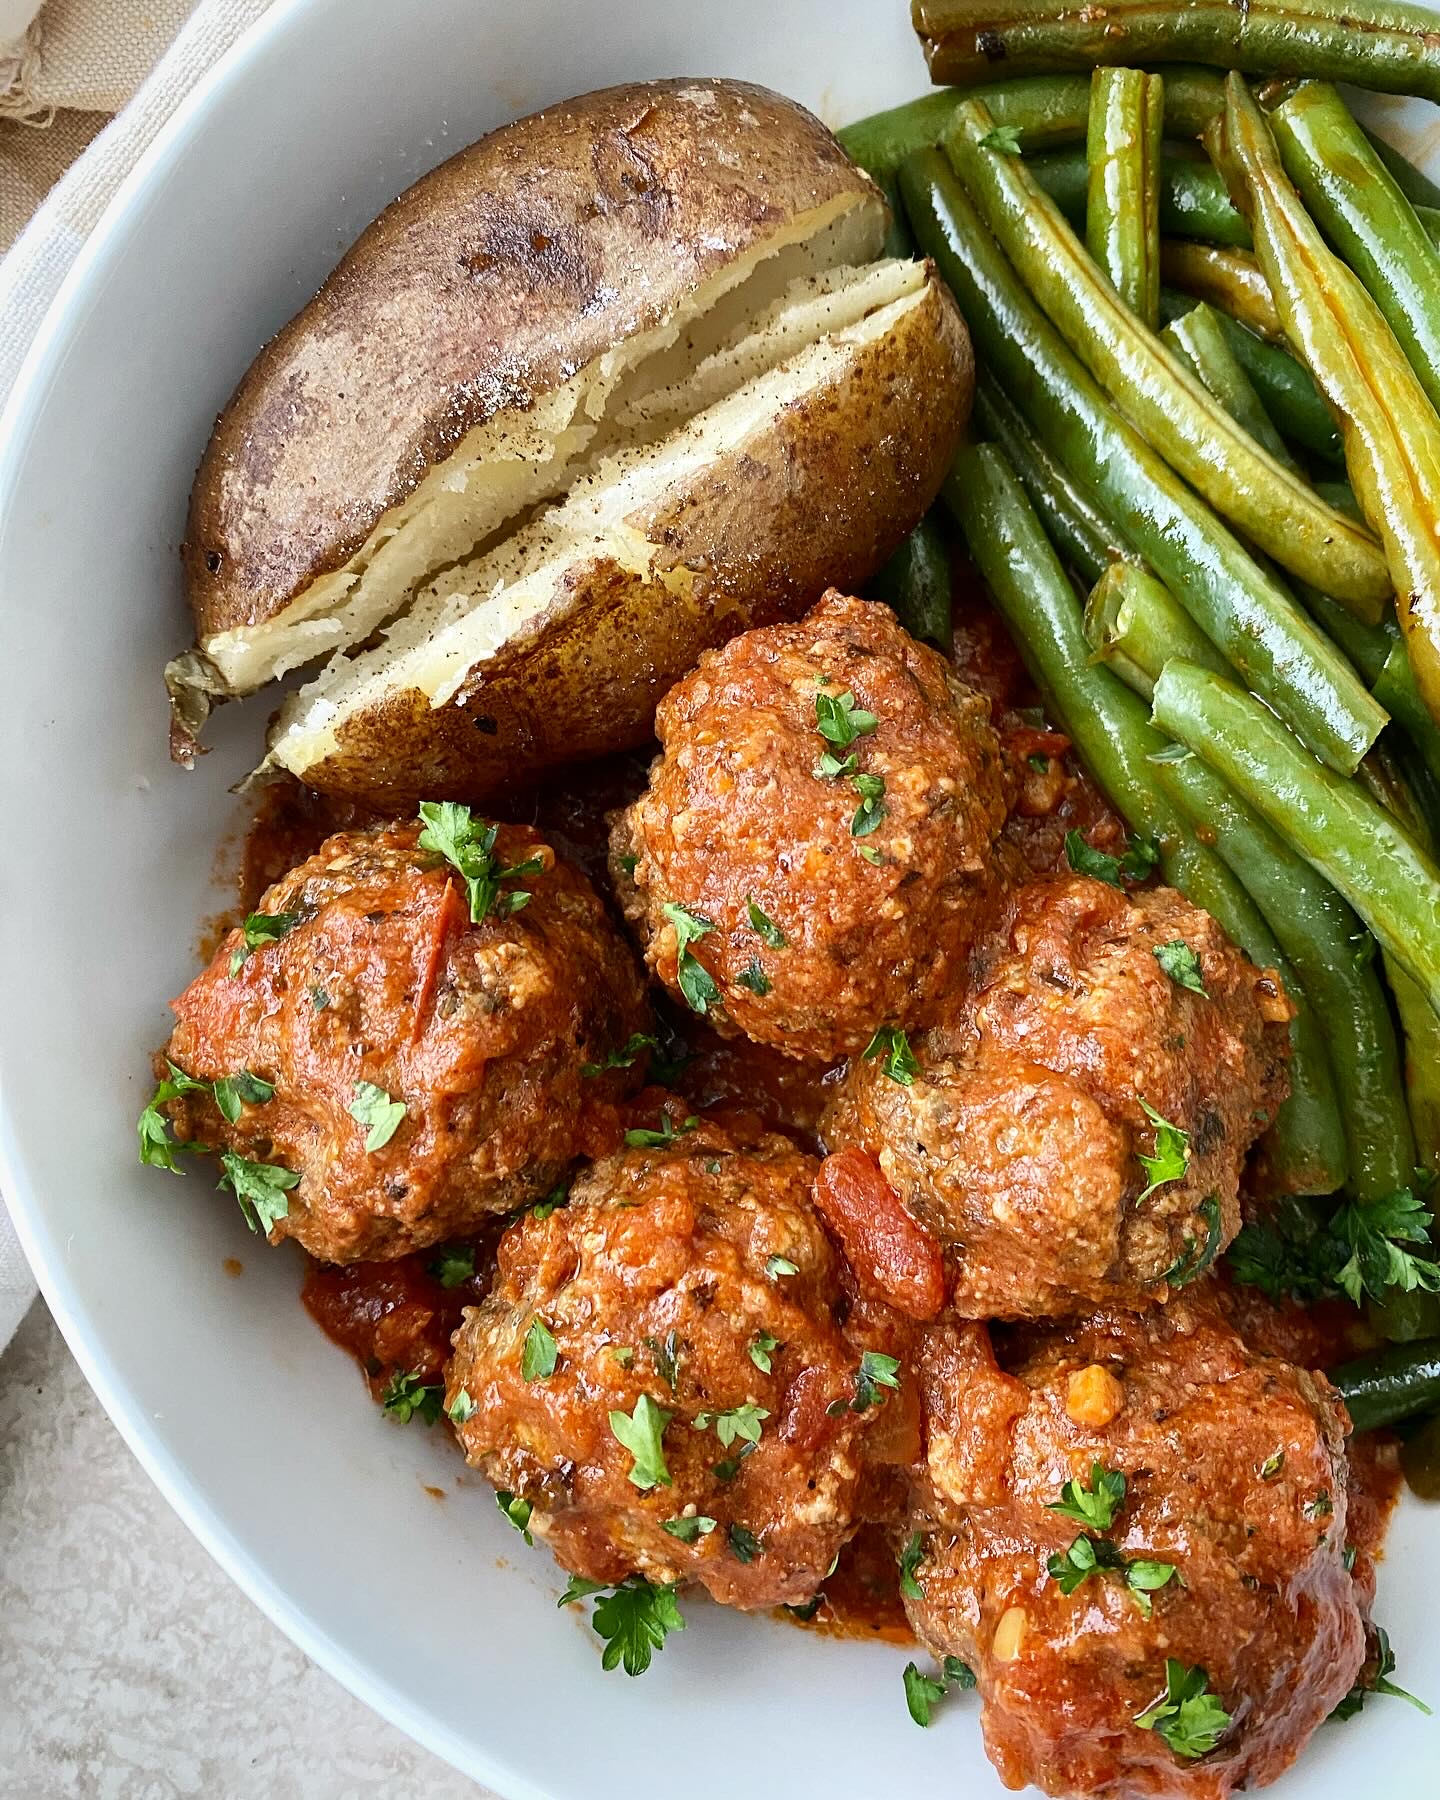 close upi shot of cooked meatballs, green beans, and a baked potato in a white plate